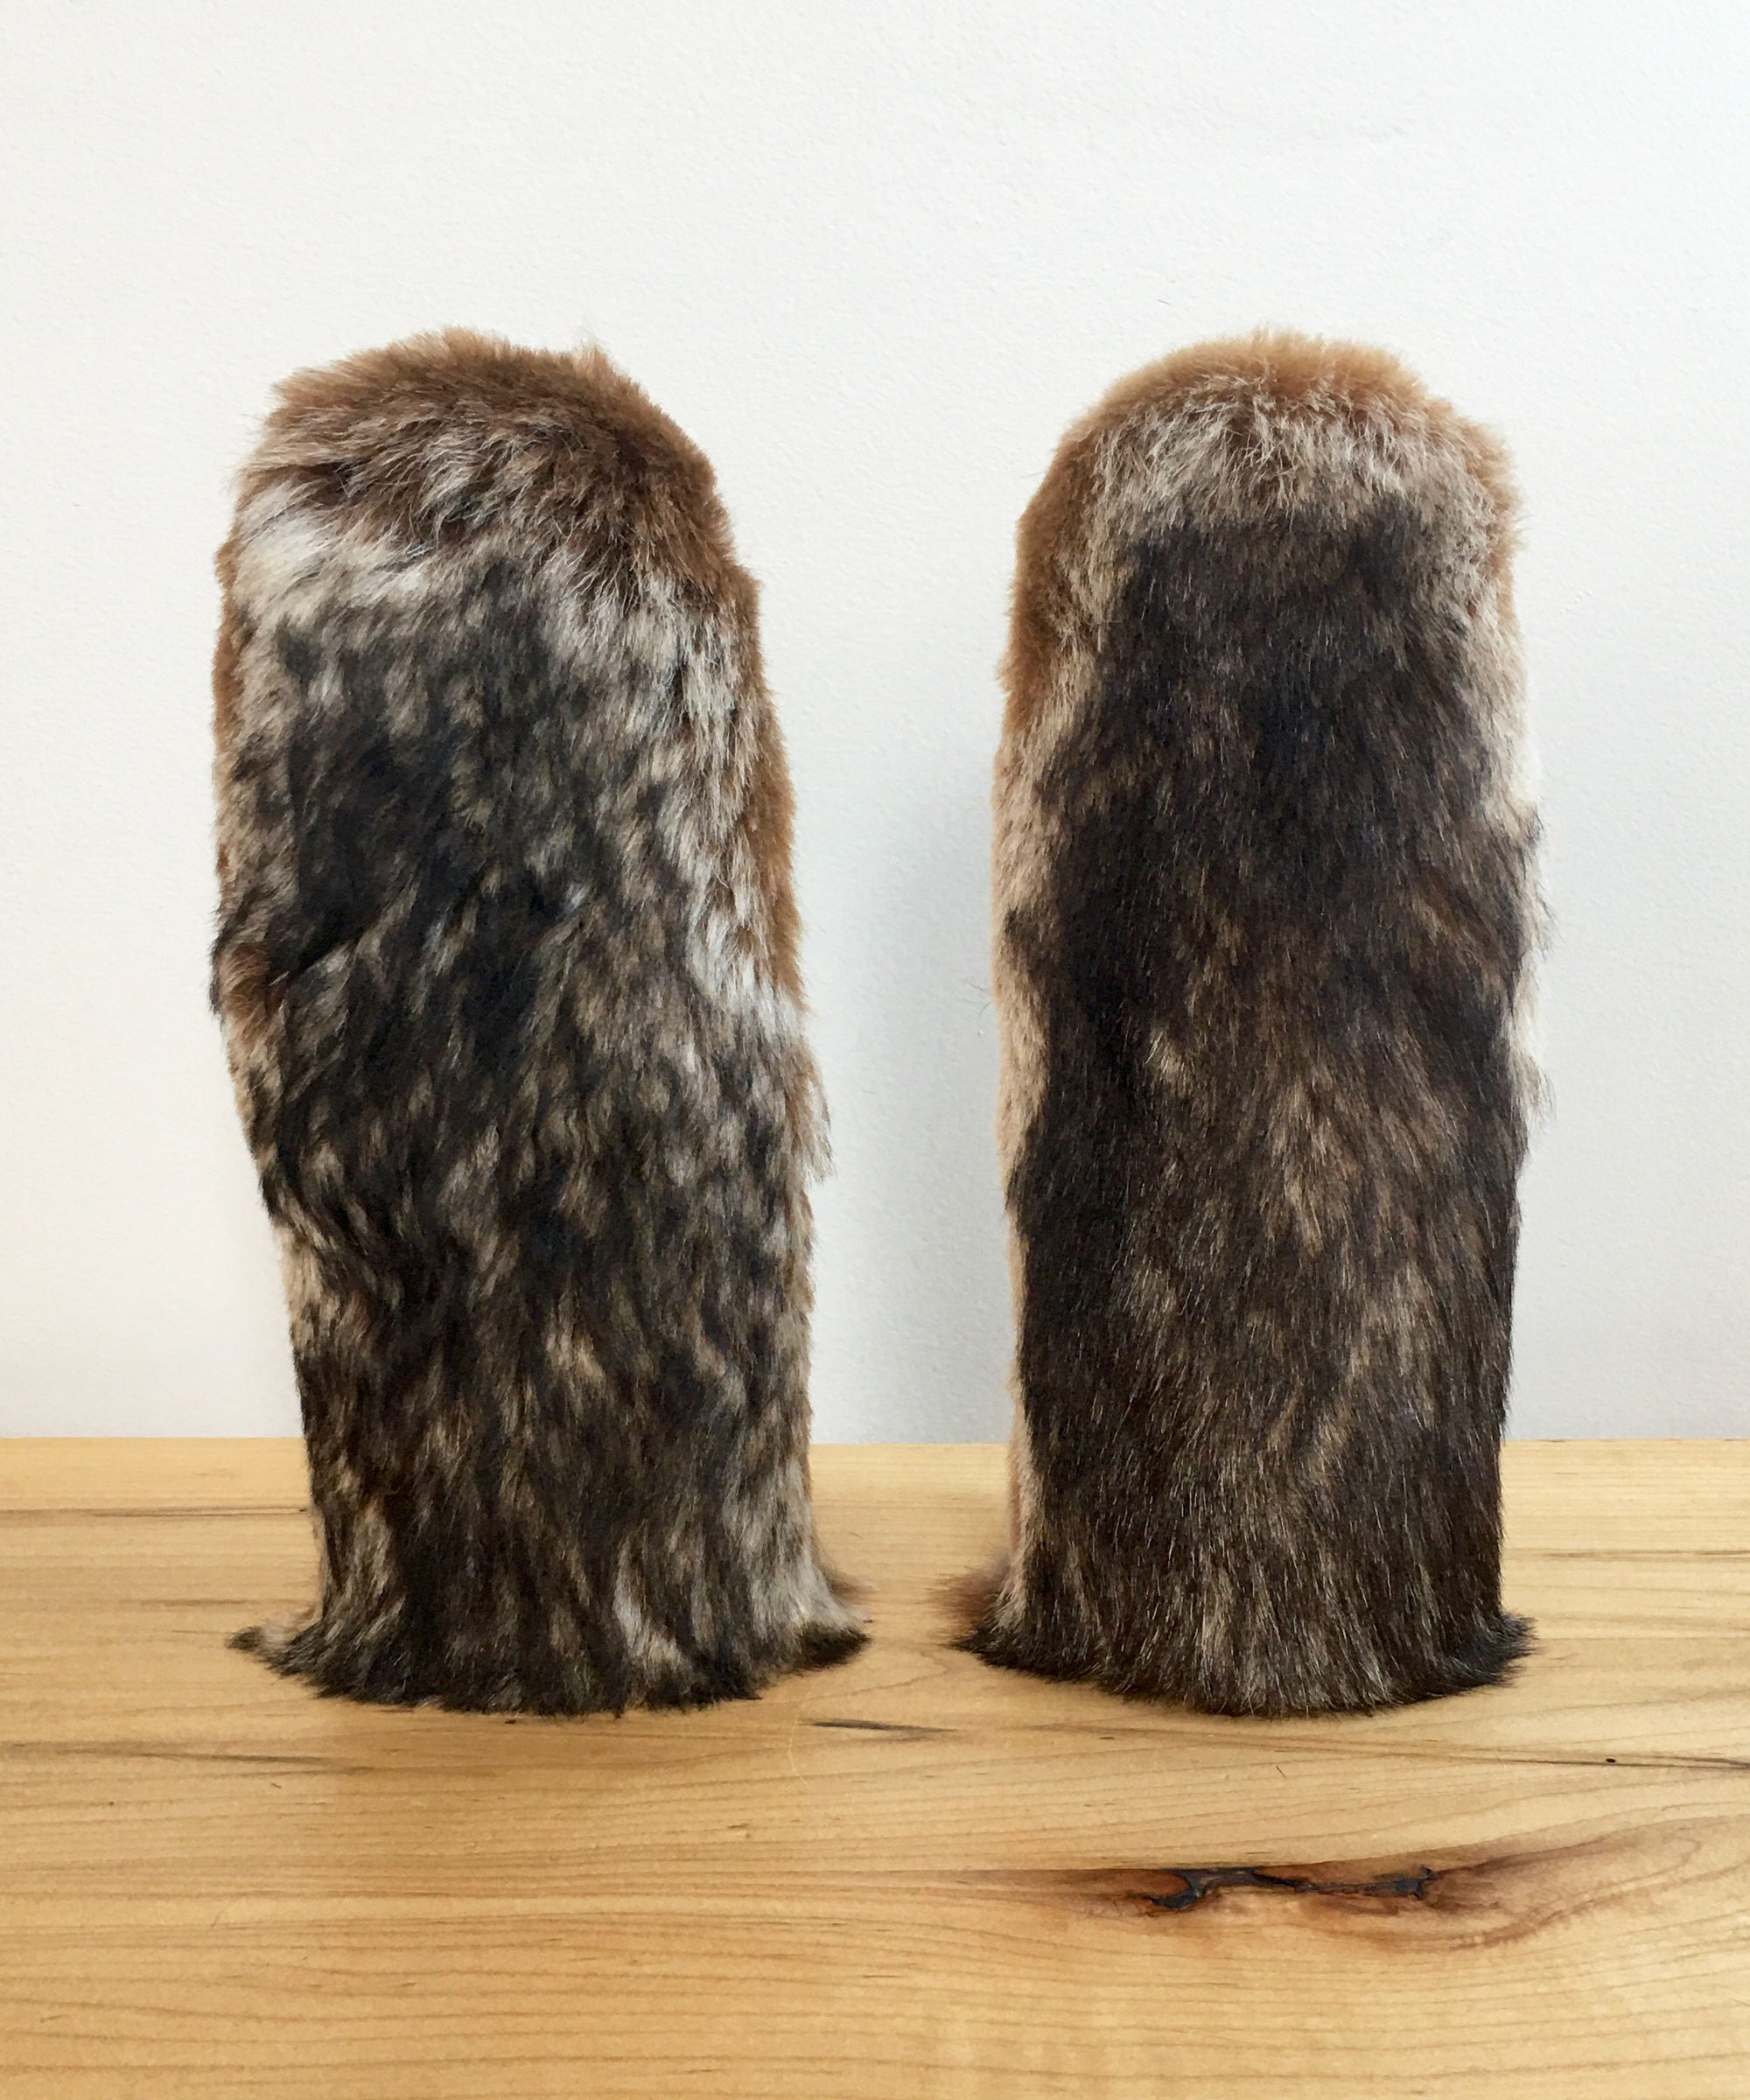 genuine sheepskin mitts, real fur mittens gloves with fur lining made from recycled fur coats. stylish fur mittens women, brown sheepskin mitten with fur lining for -40 weather